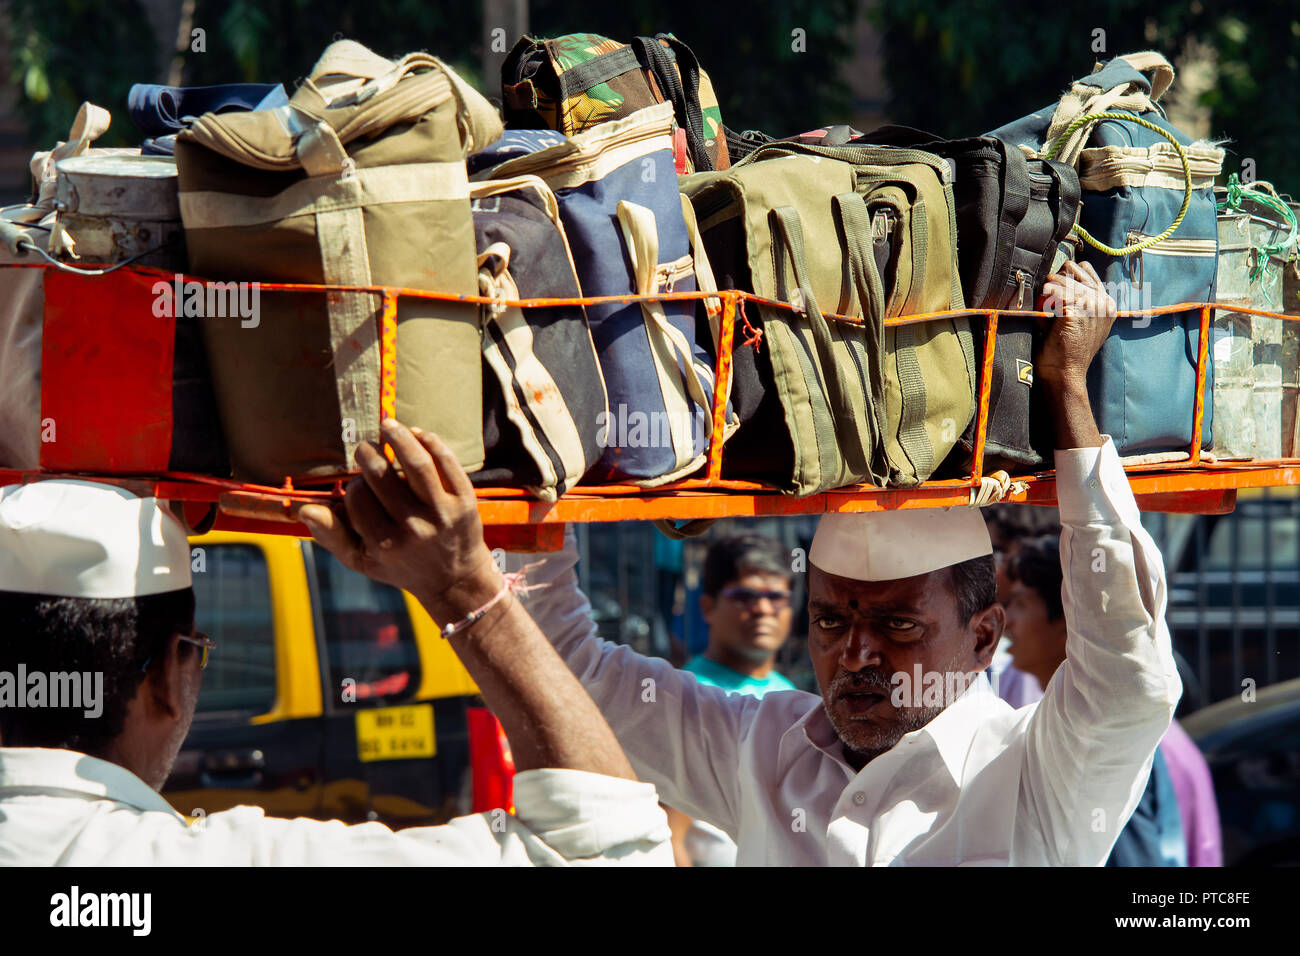 With the help of another a Indian man loads on a basket full of Dabbawala hot lunches on to his head to deliver around Mumbai, India. Stock Photo